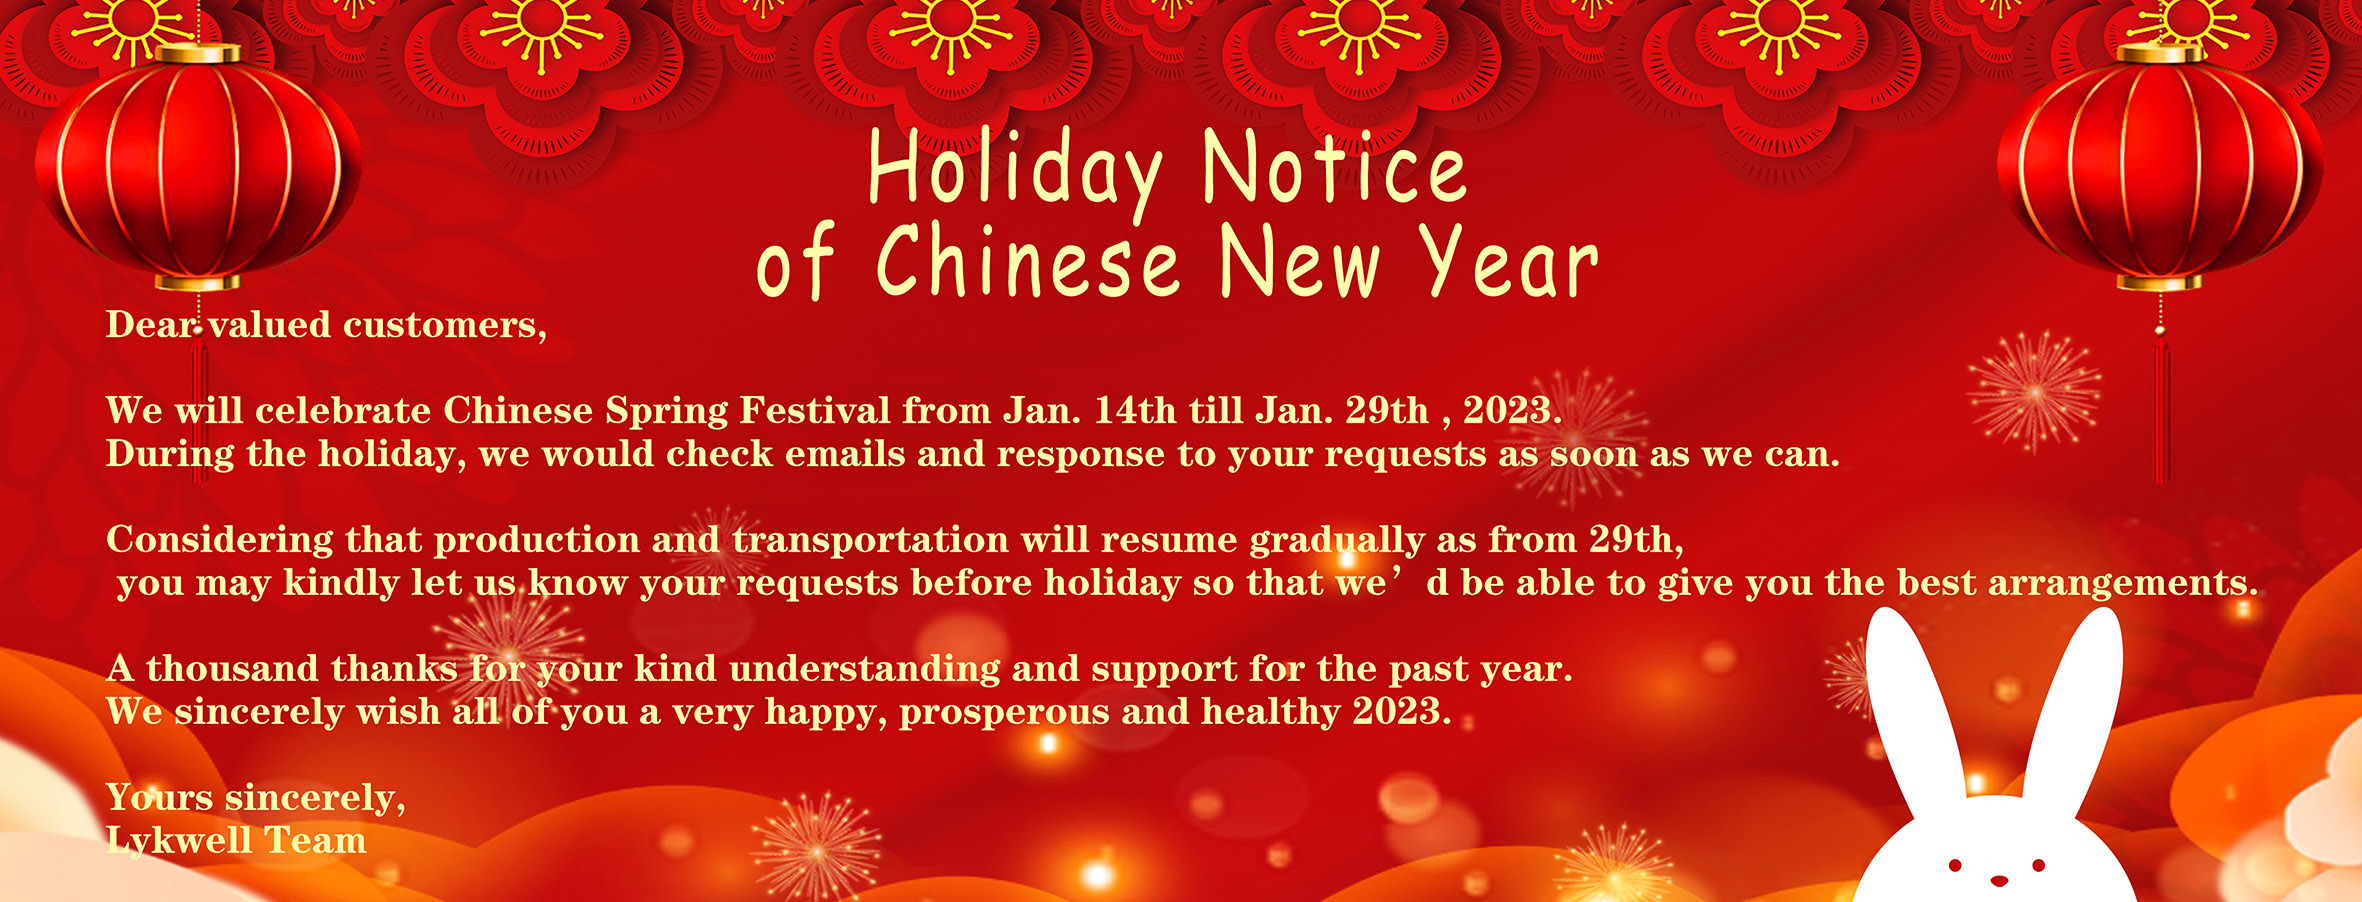 Holiday Notice of Chinese New Year（Kathy）.jpg